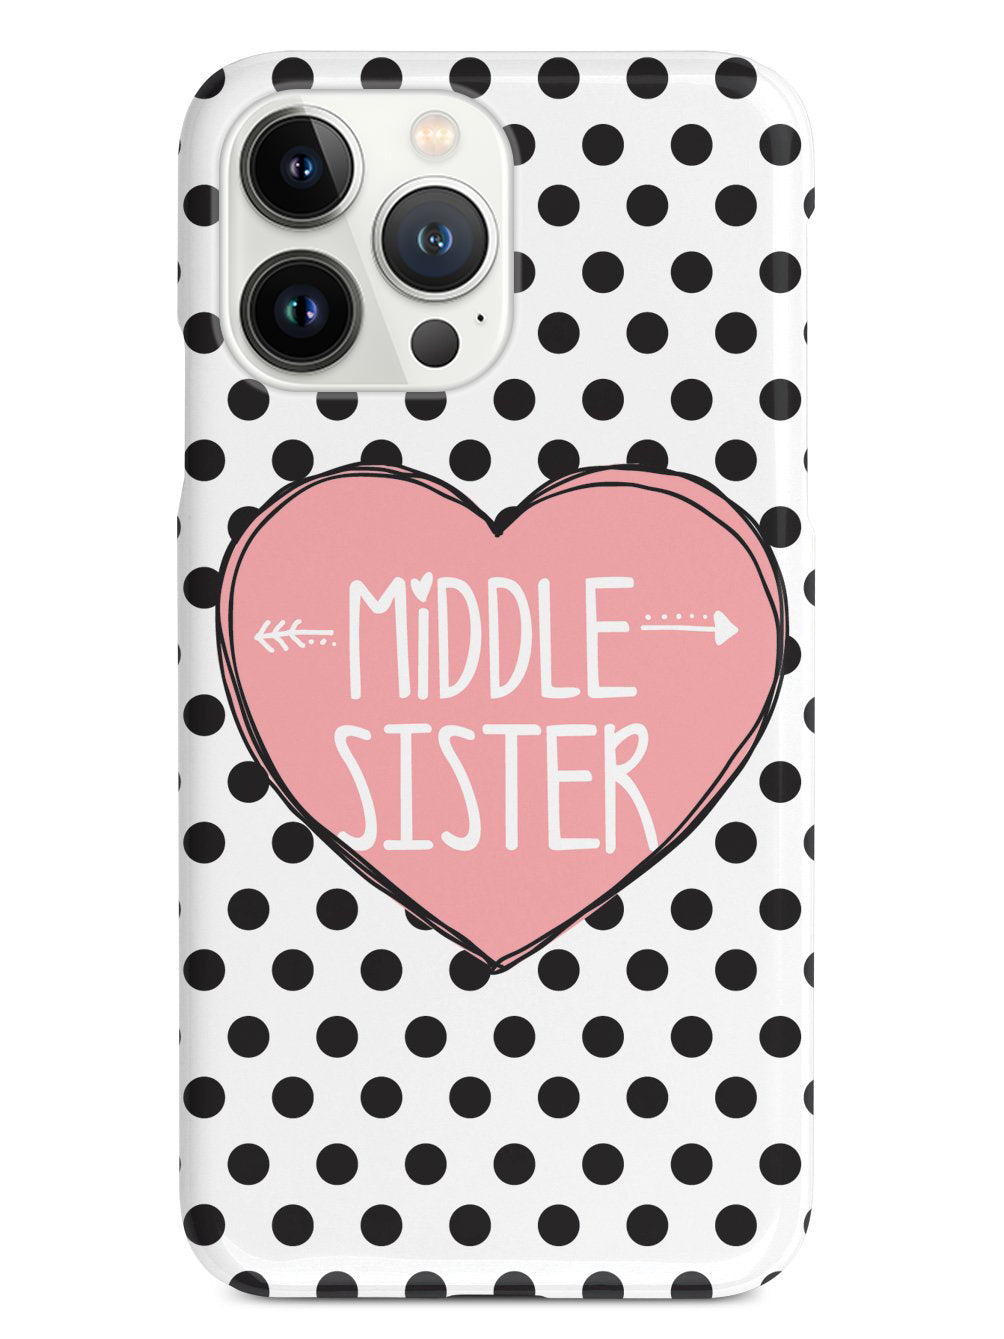 Sisterly Love - Middle Sister - Polka Dots Case